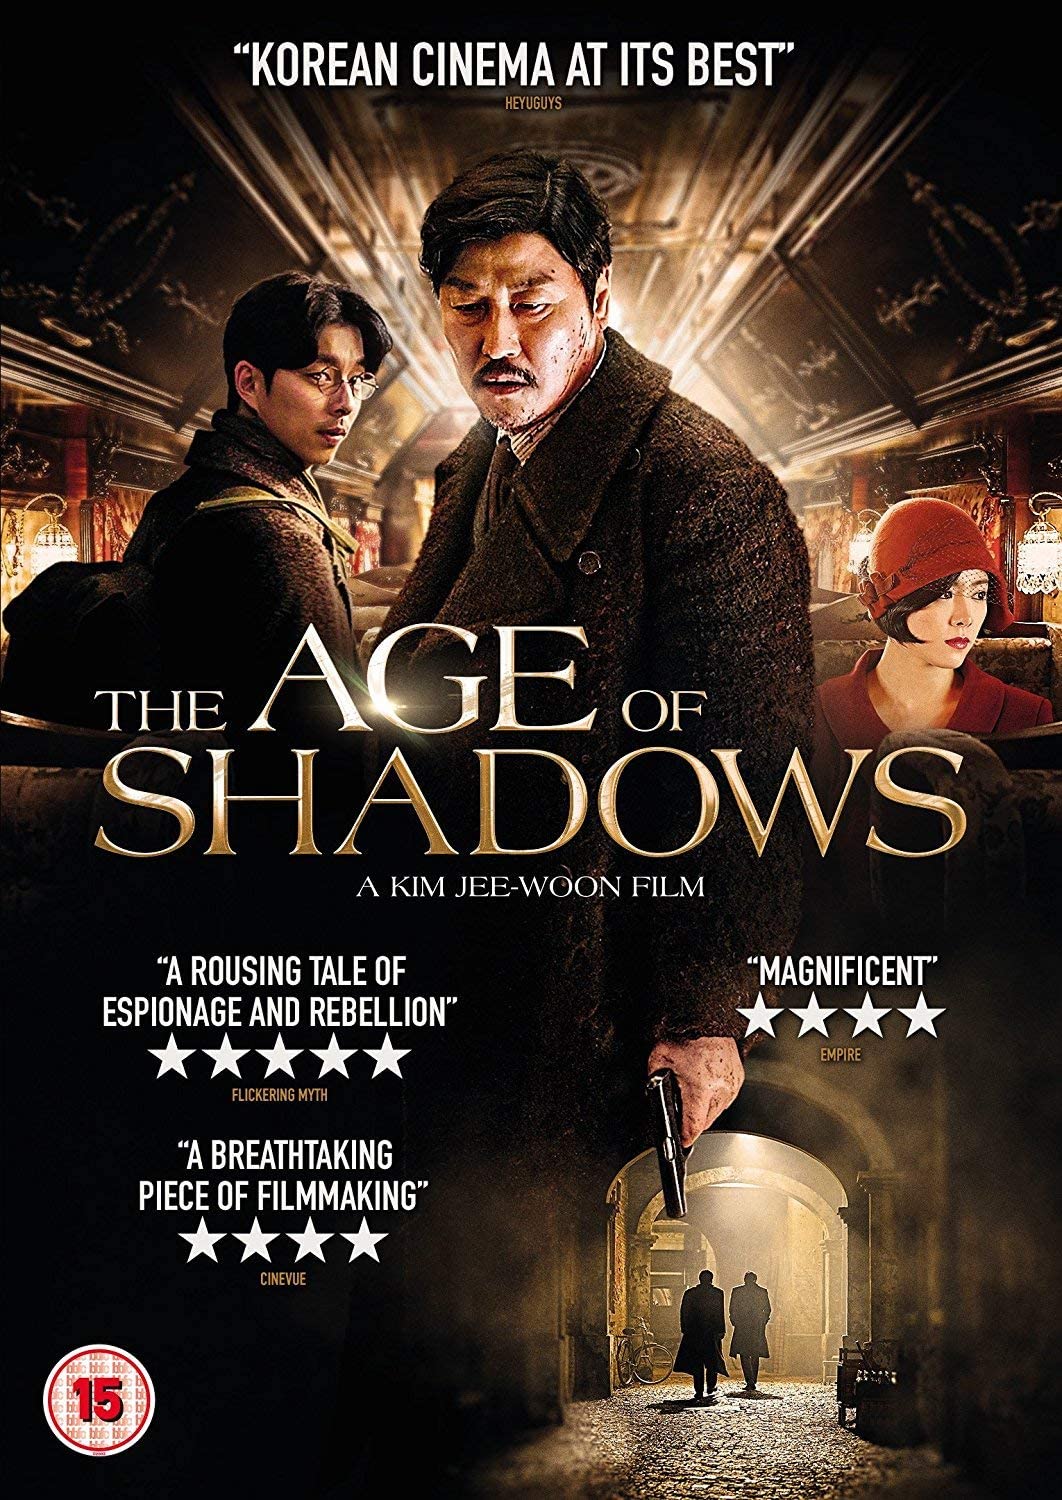 The Age of Shadows [2017] - Action/Thriller [DVD]